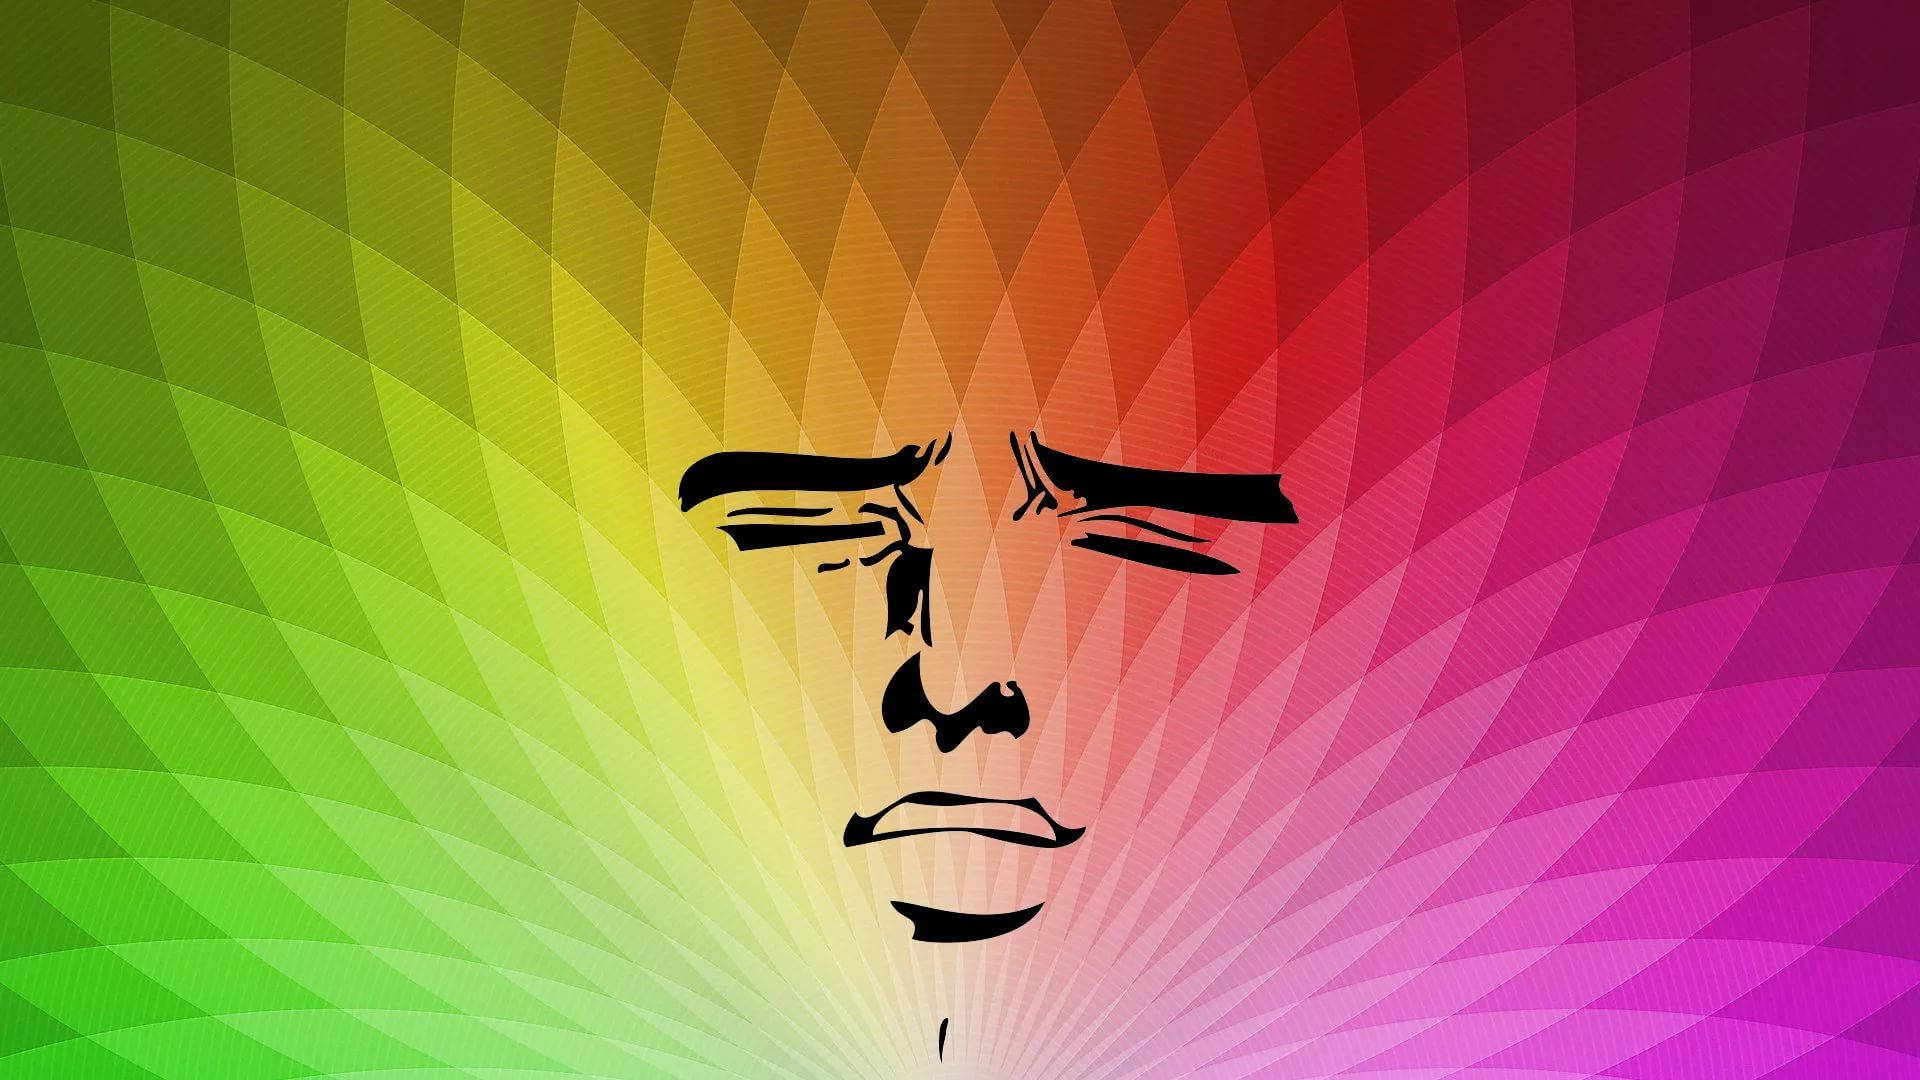 Funny Yaranaika face meme with close eyes and thick eyebrows in rainbow.